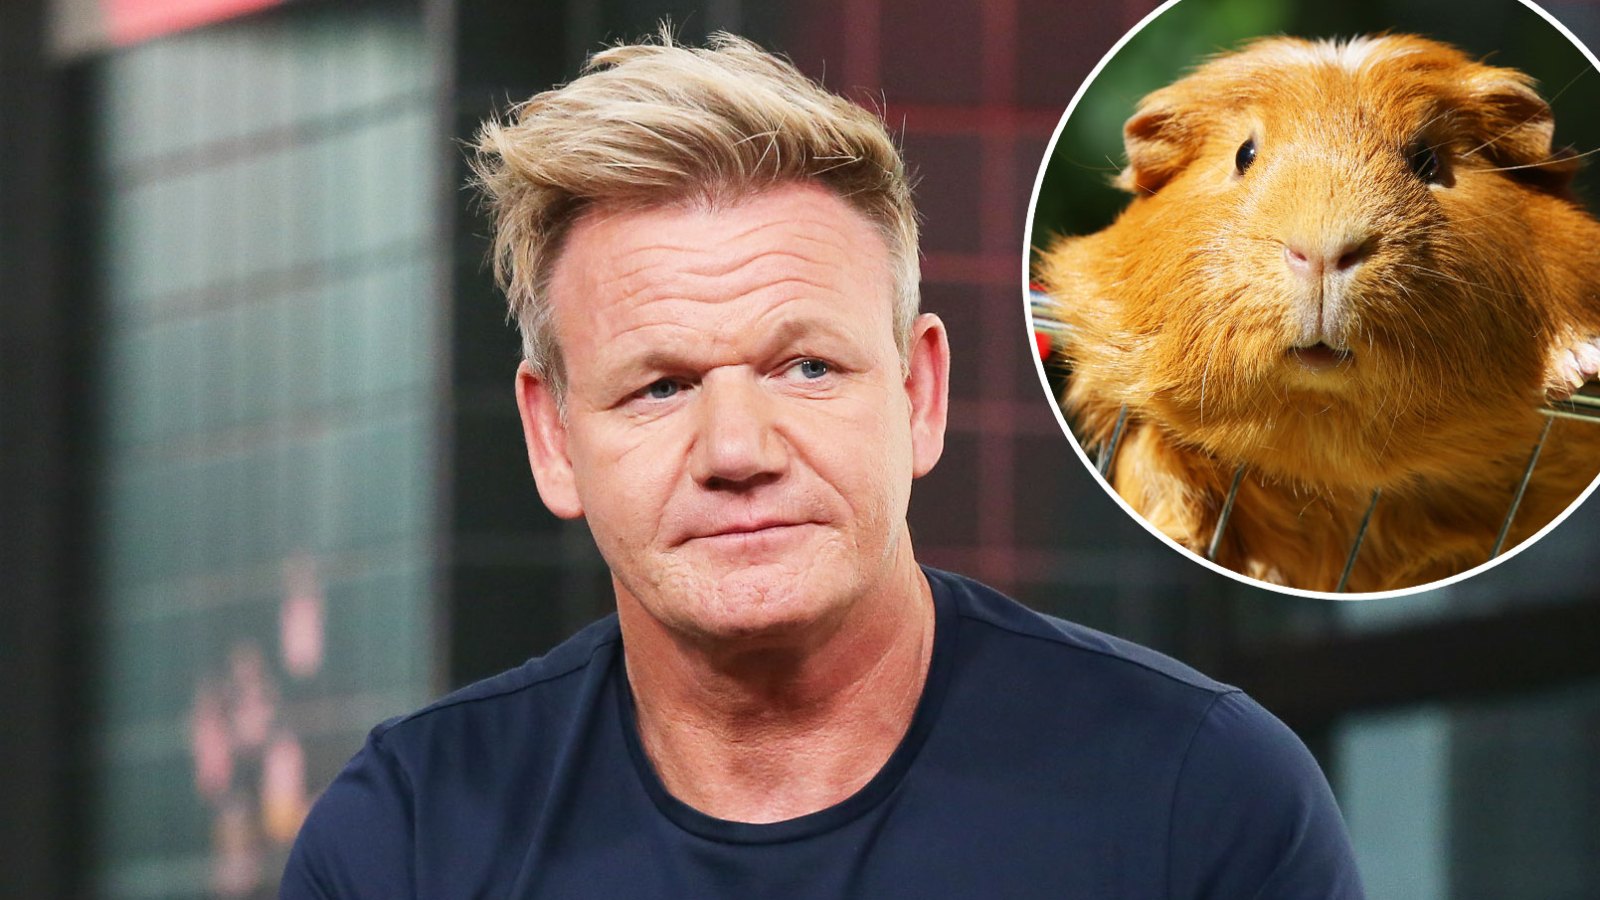 Gordon Ramsay Under Fire for Saying Guinea Pigs Are Delicious